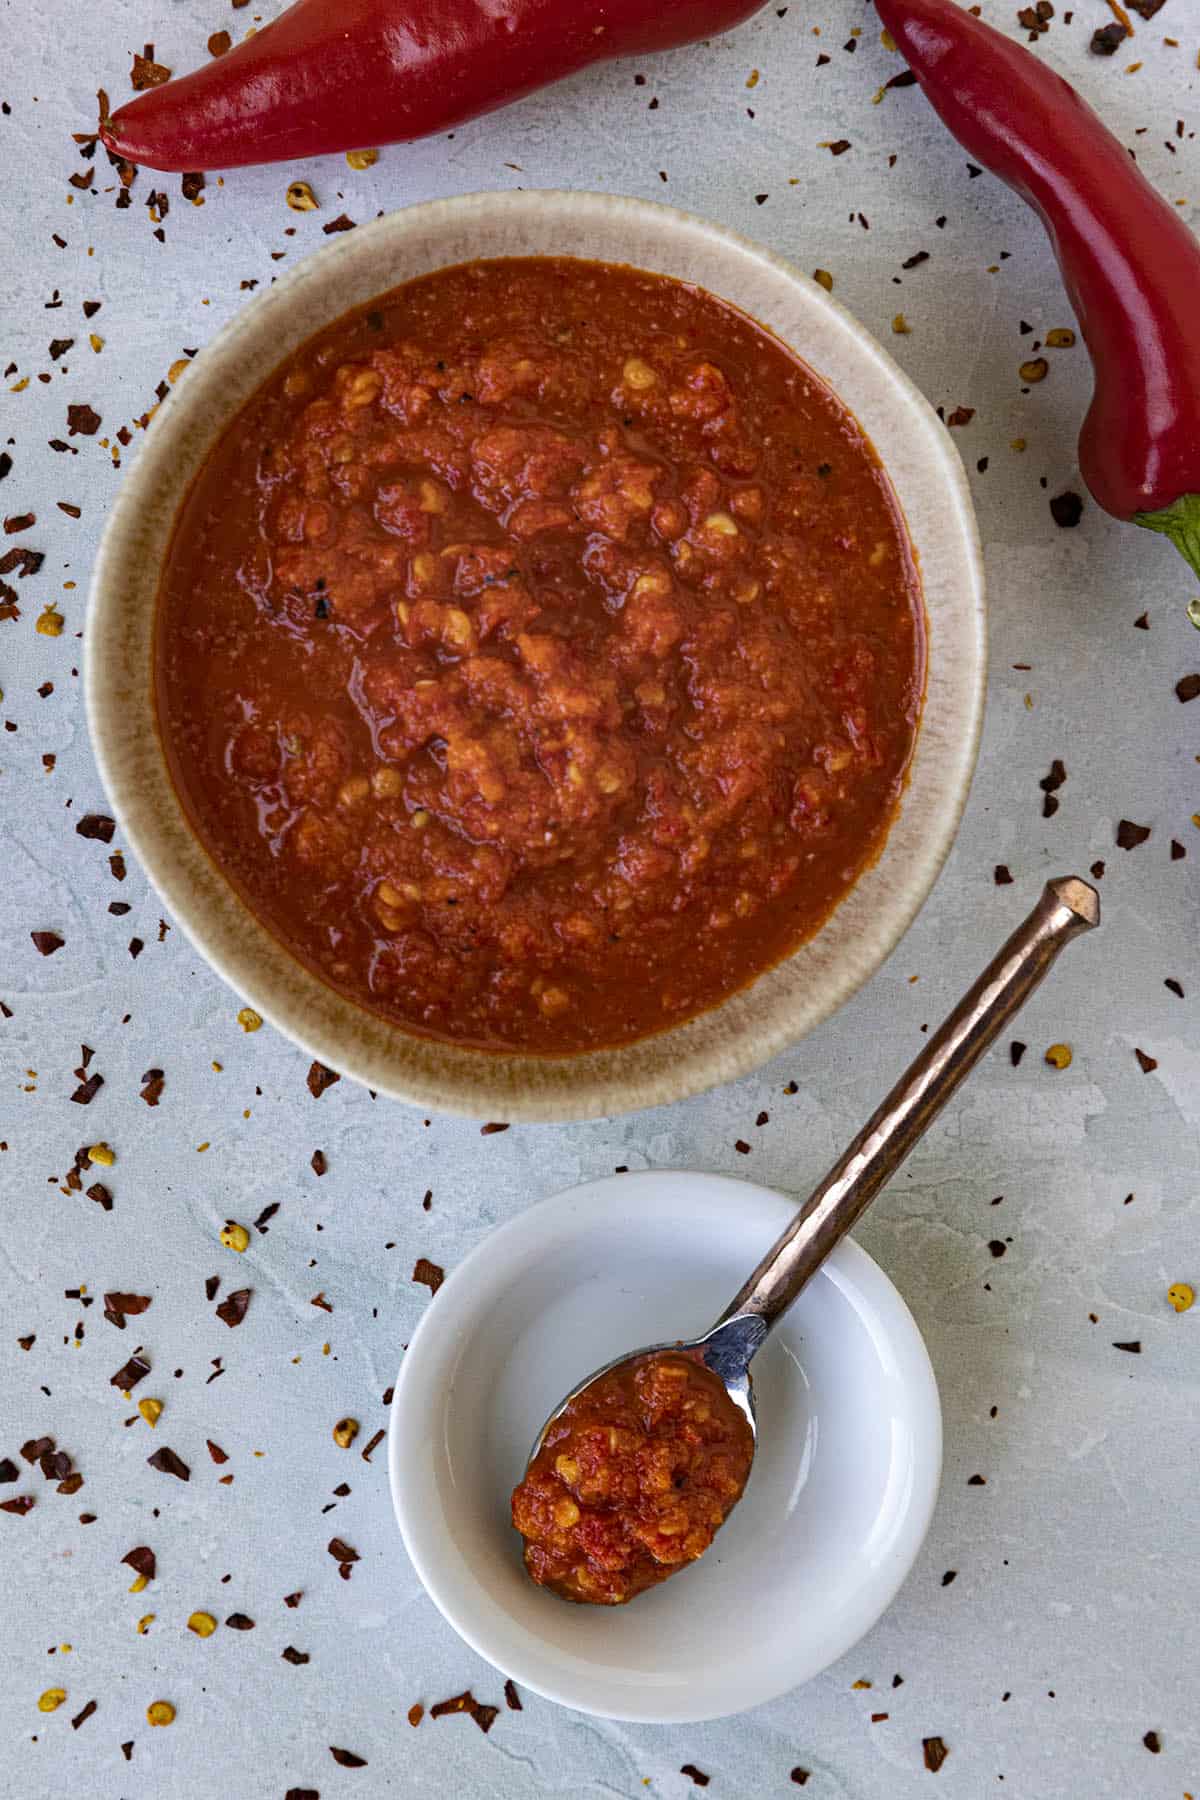 Homemade Chili Garlic Sauce in a bowl and on a spoon